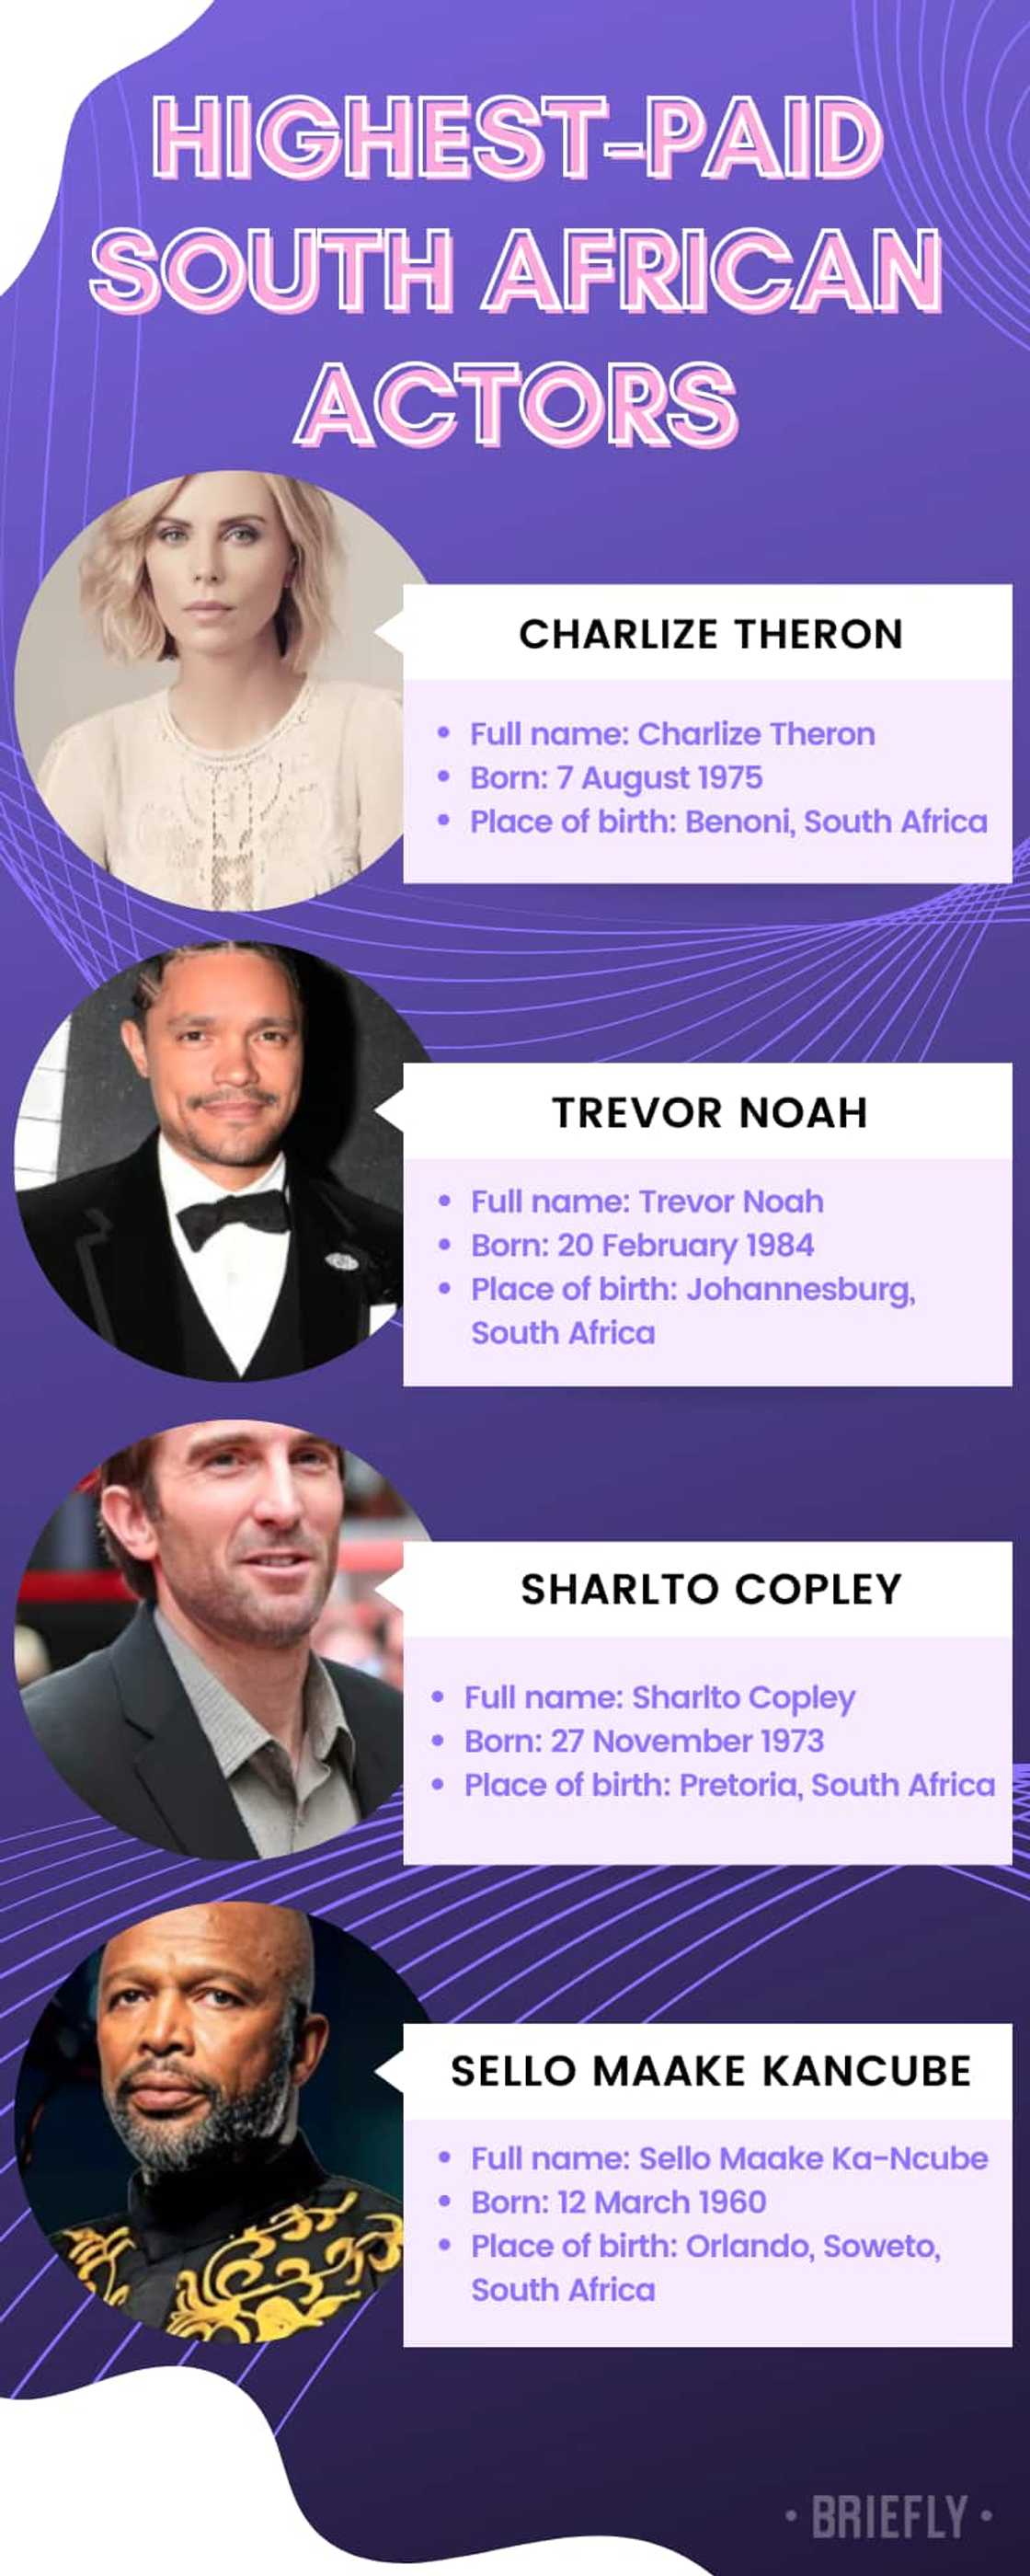 Highest-paid South African actors